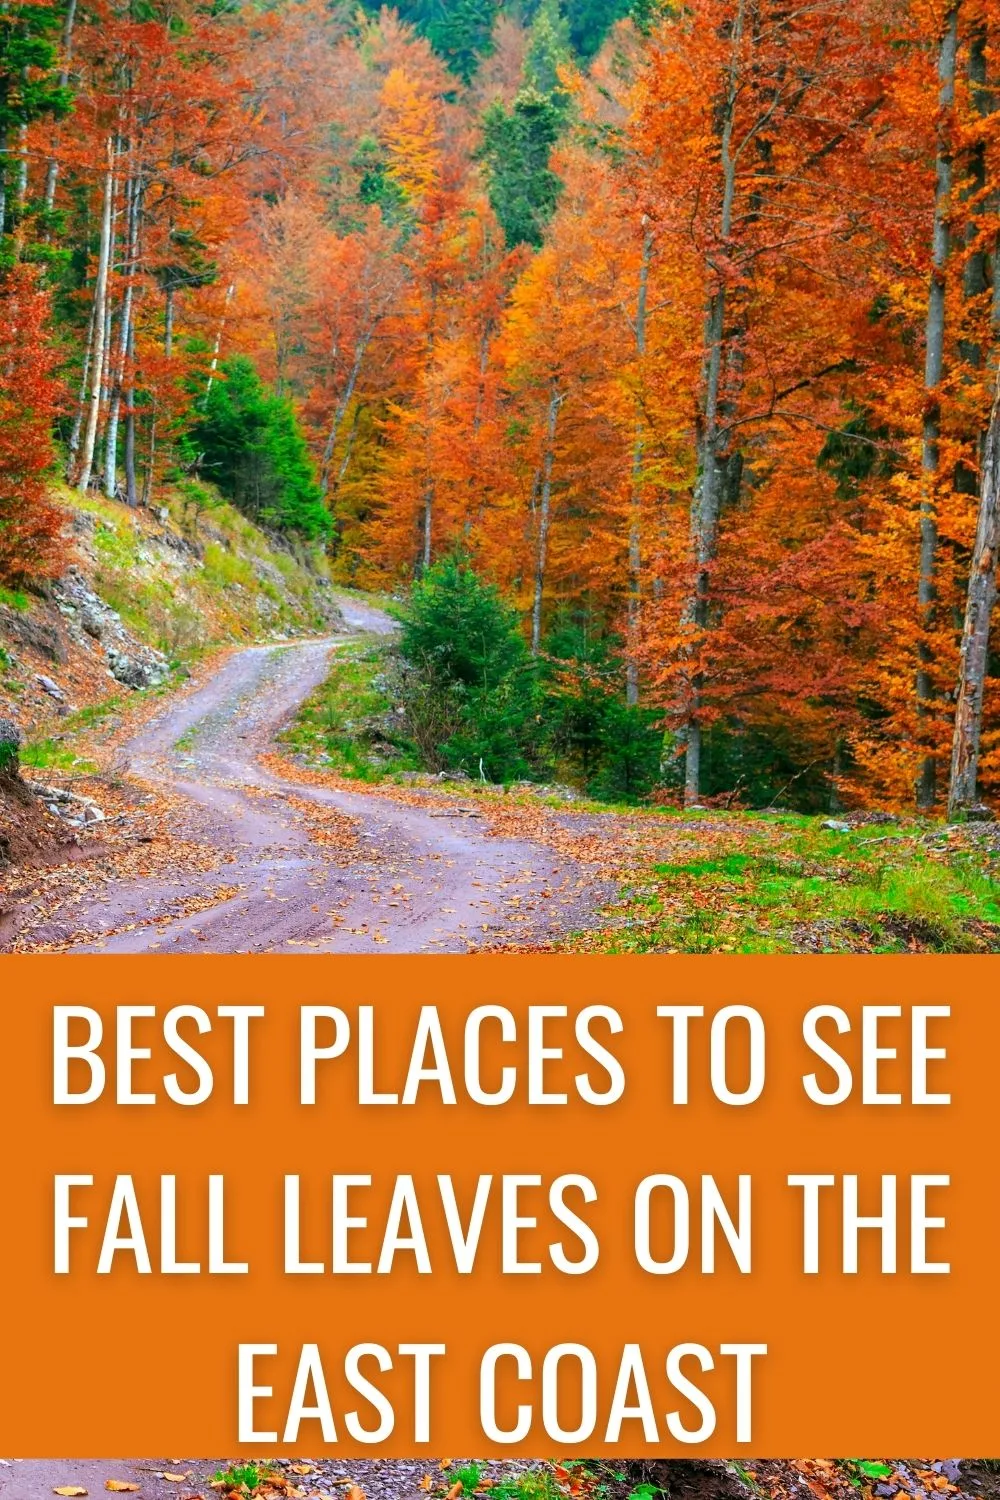 Best places to see fall leaves on the East Coast